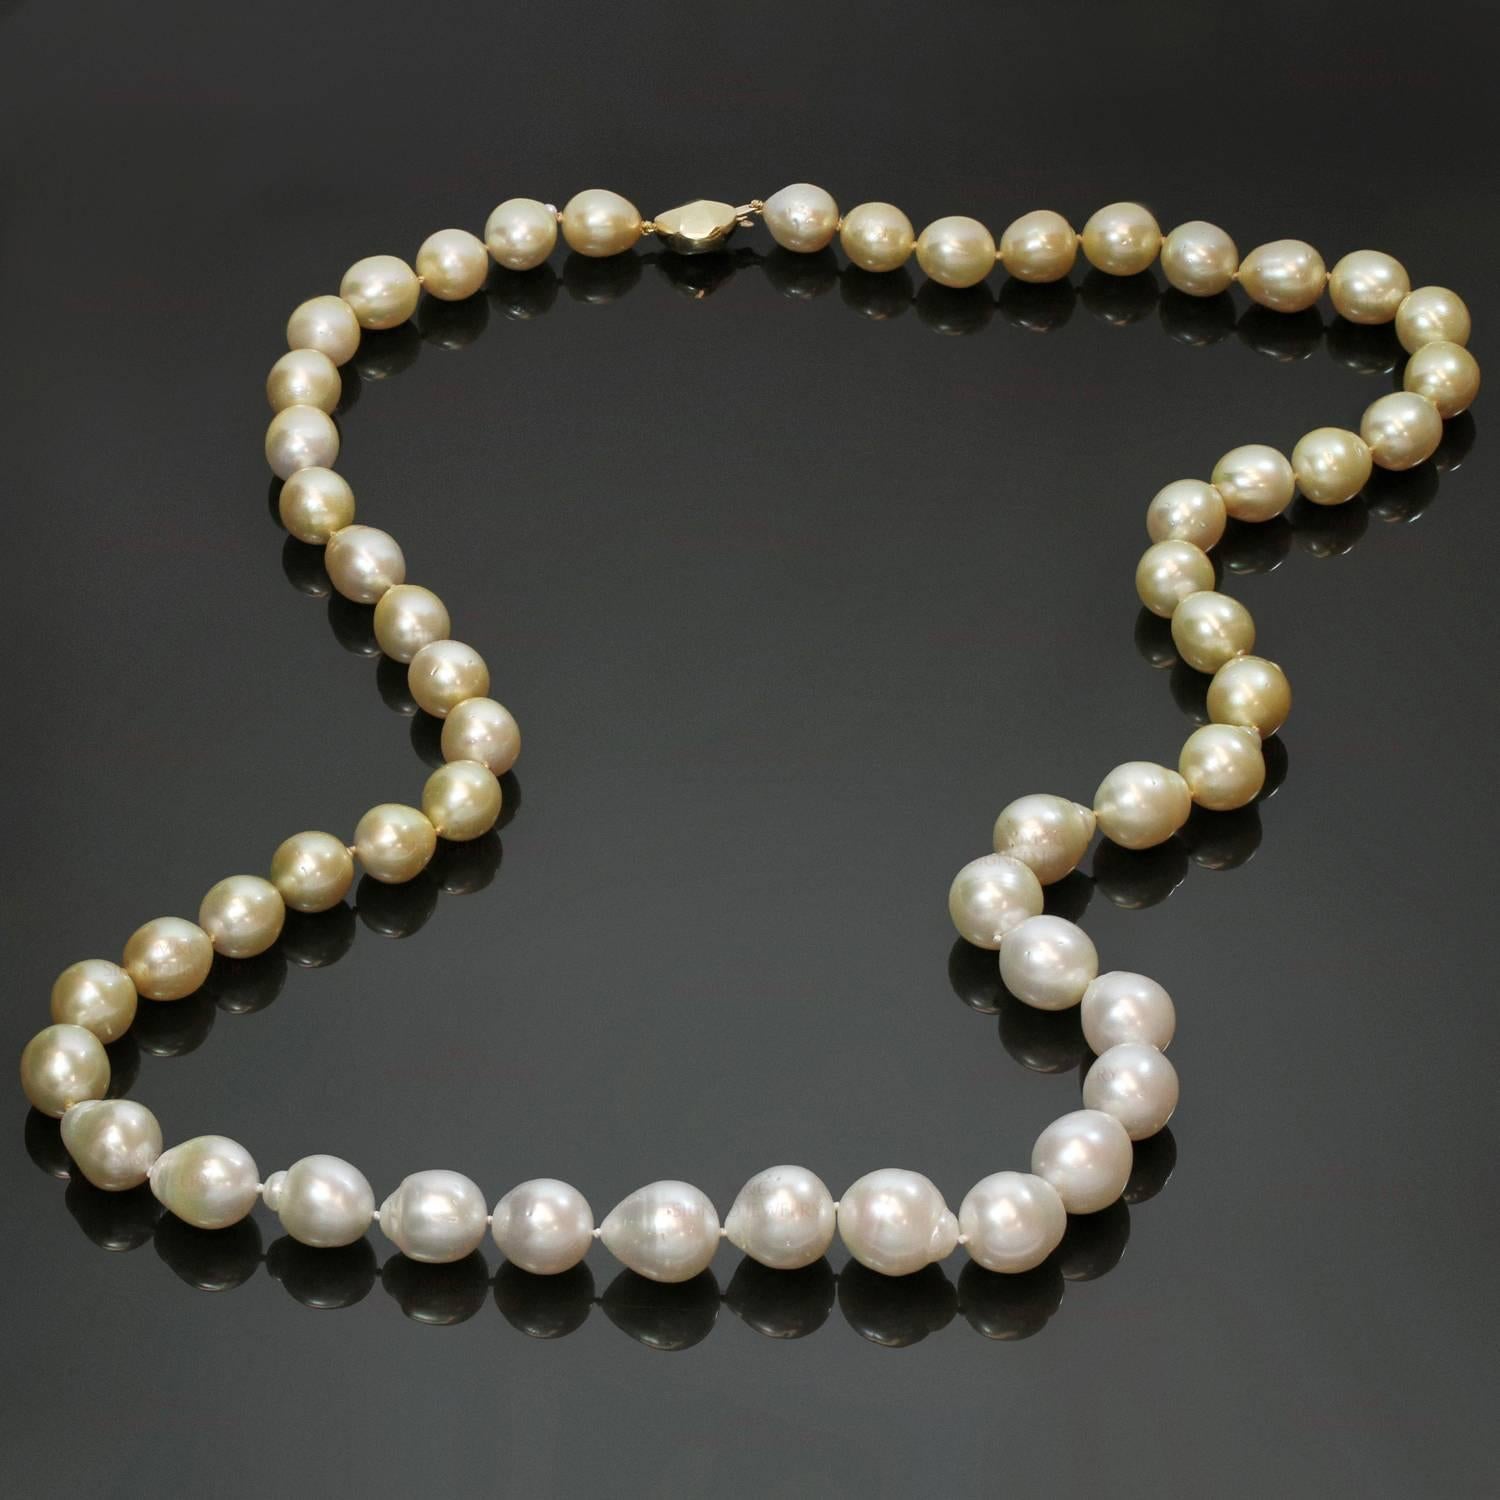 This fabulous necklace features a beautiful selection of 53 shiny South Sea Baroque Cultured Pearls in natural gold and white tones. Completed with an 18k yellow gold clasp. Made in Japan circa 2010s. Measurements: 11.7mm - 16.8mm pearls, 34